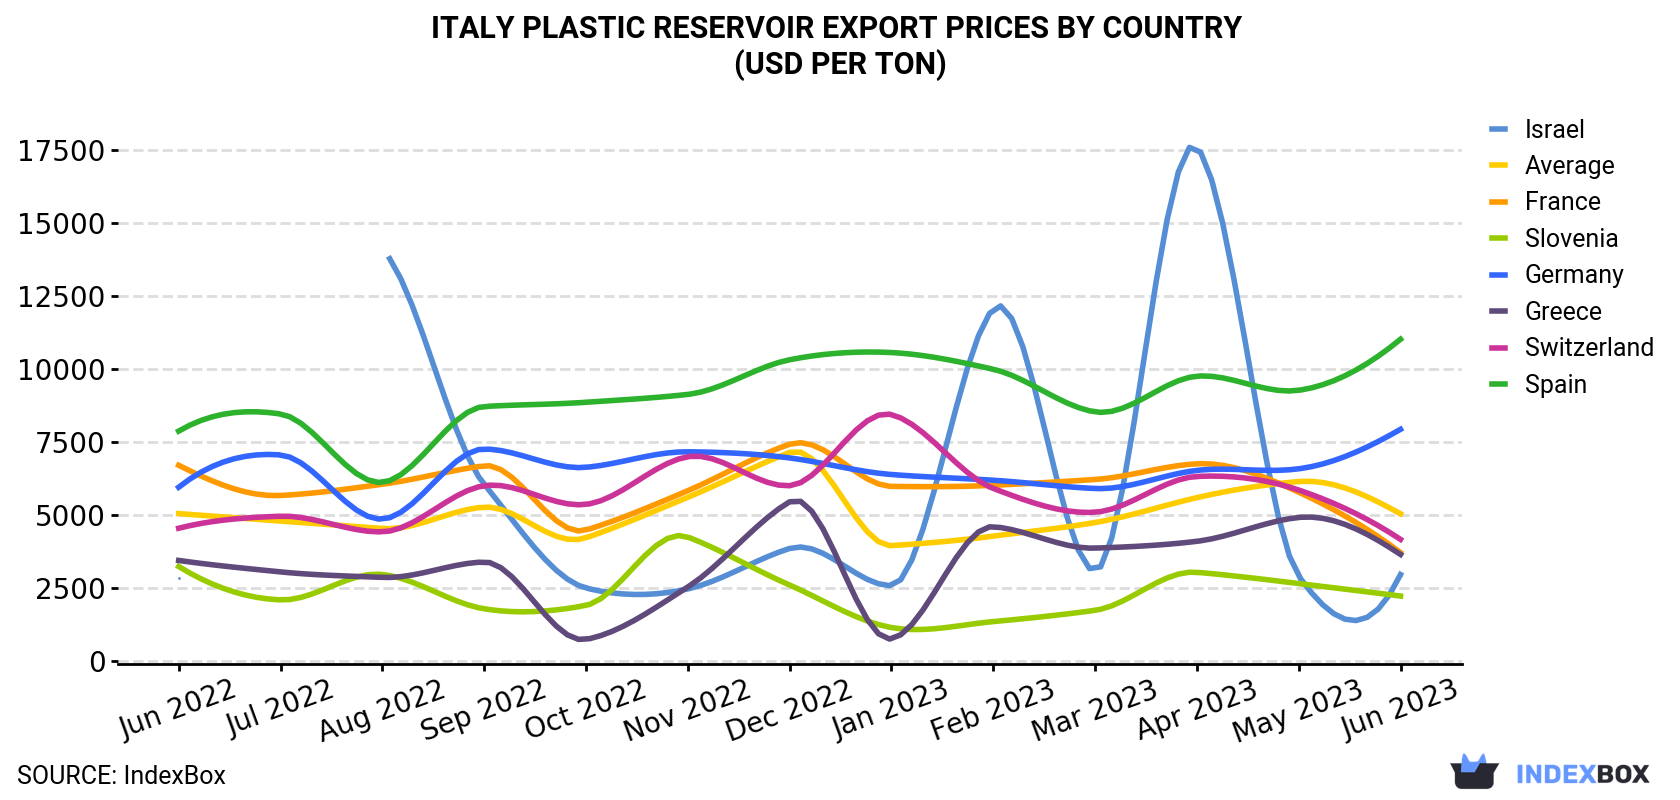 Italy Plastic Reservoir Export Prices By Country (USD Per Ton)